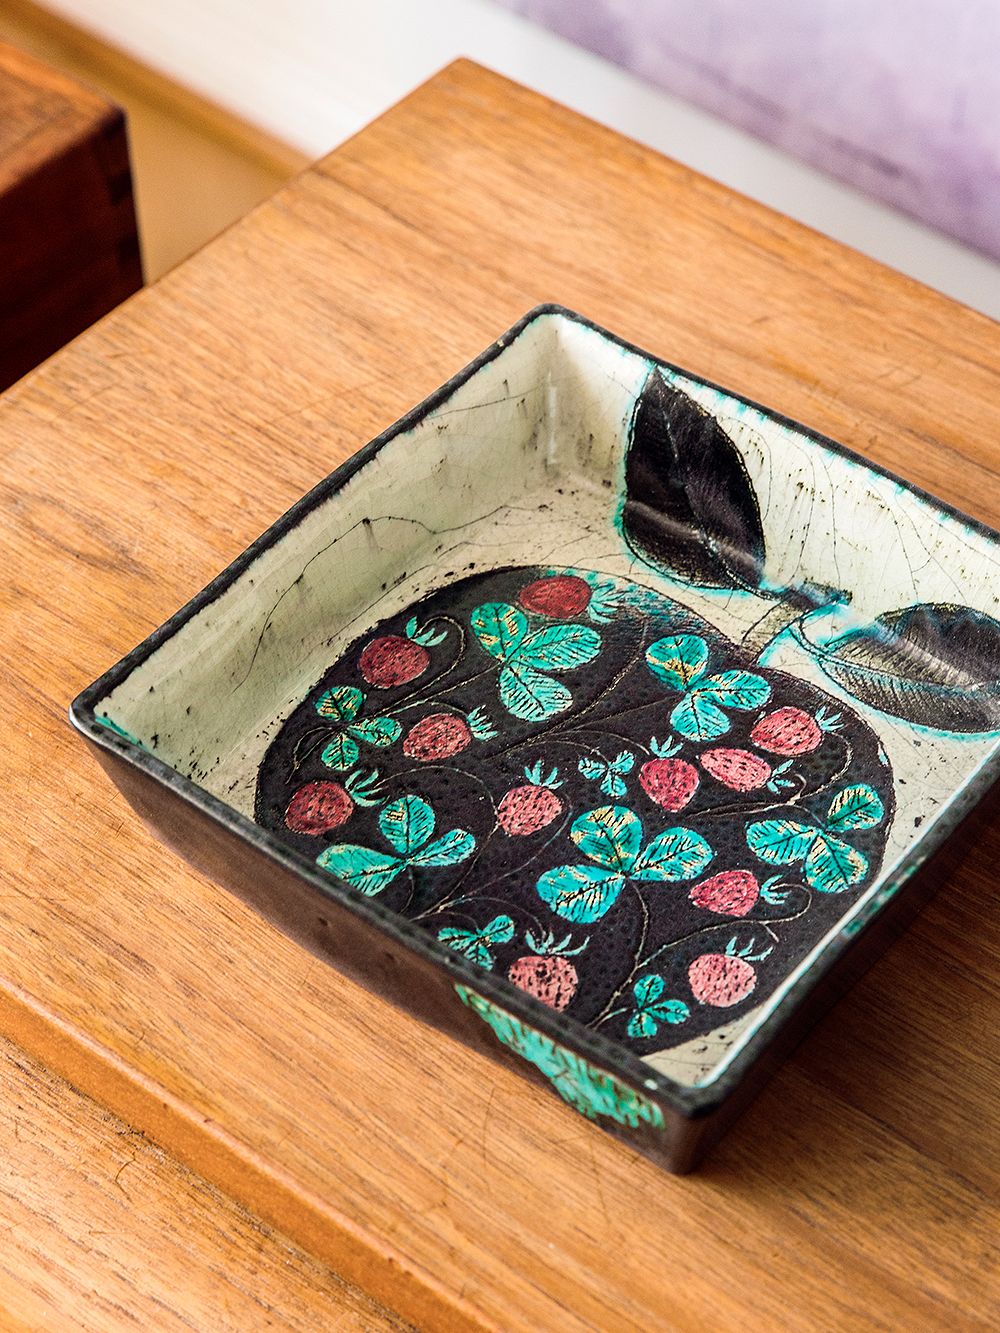 An image of a ceramic bowl placed on a table.